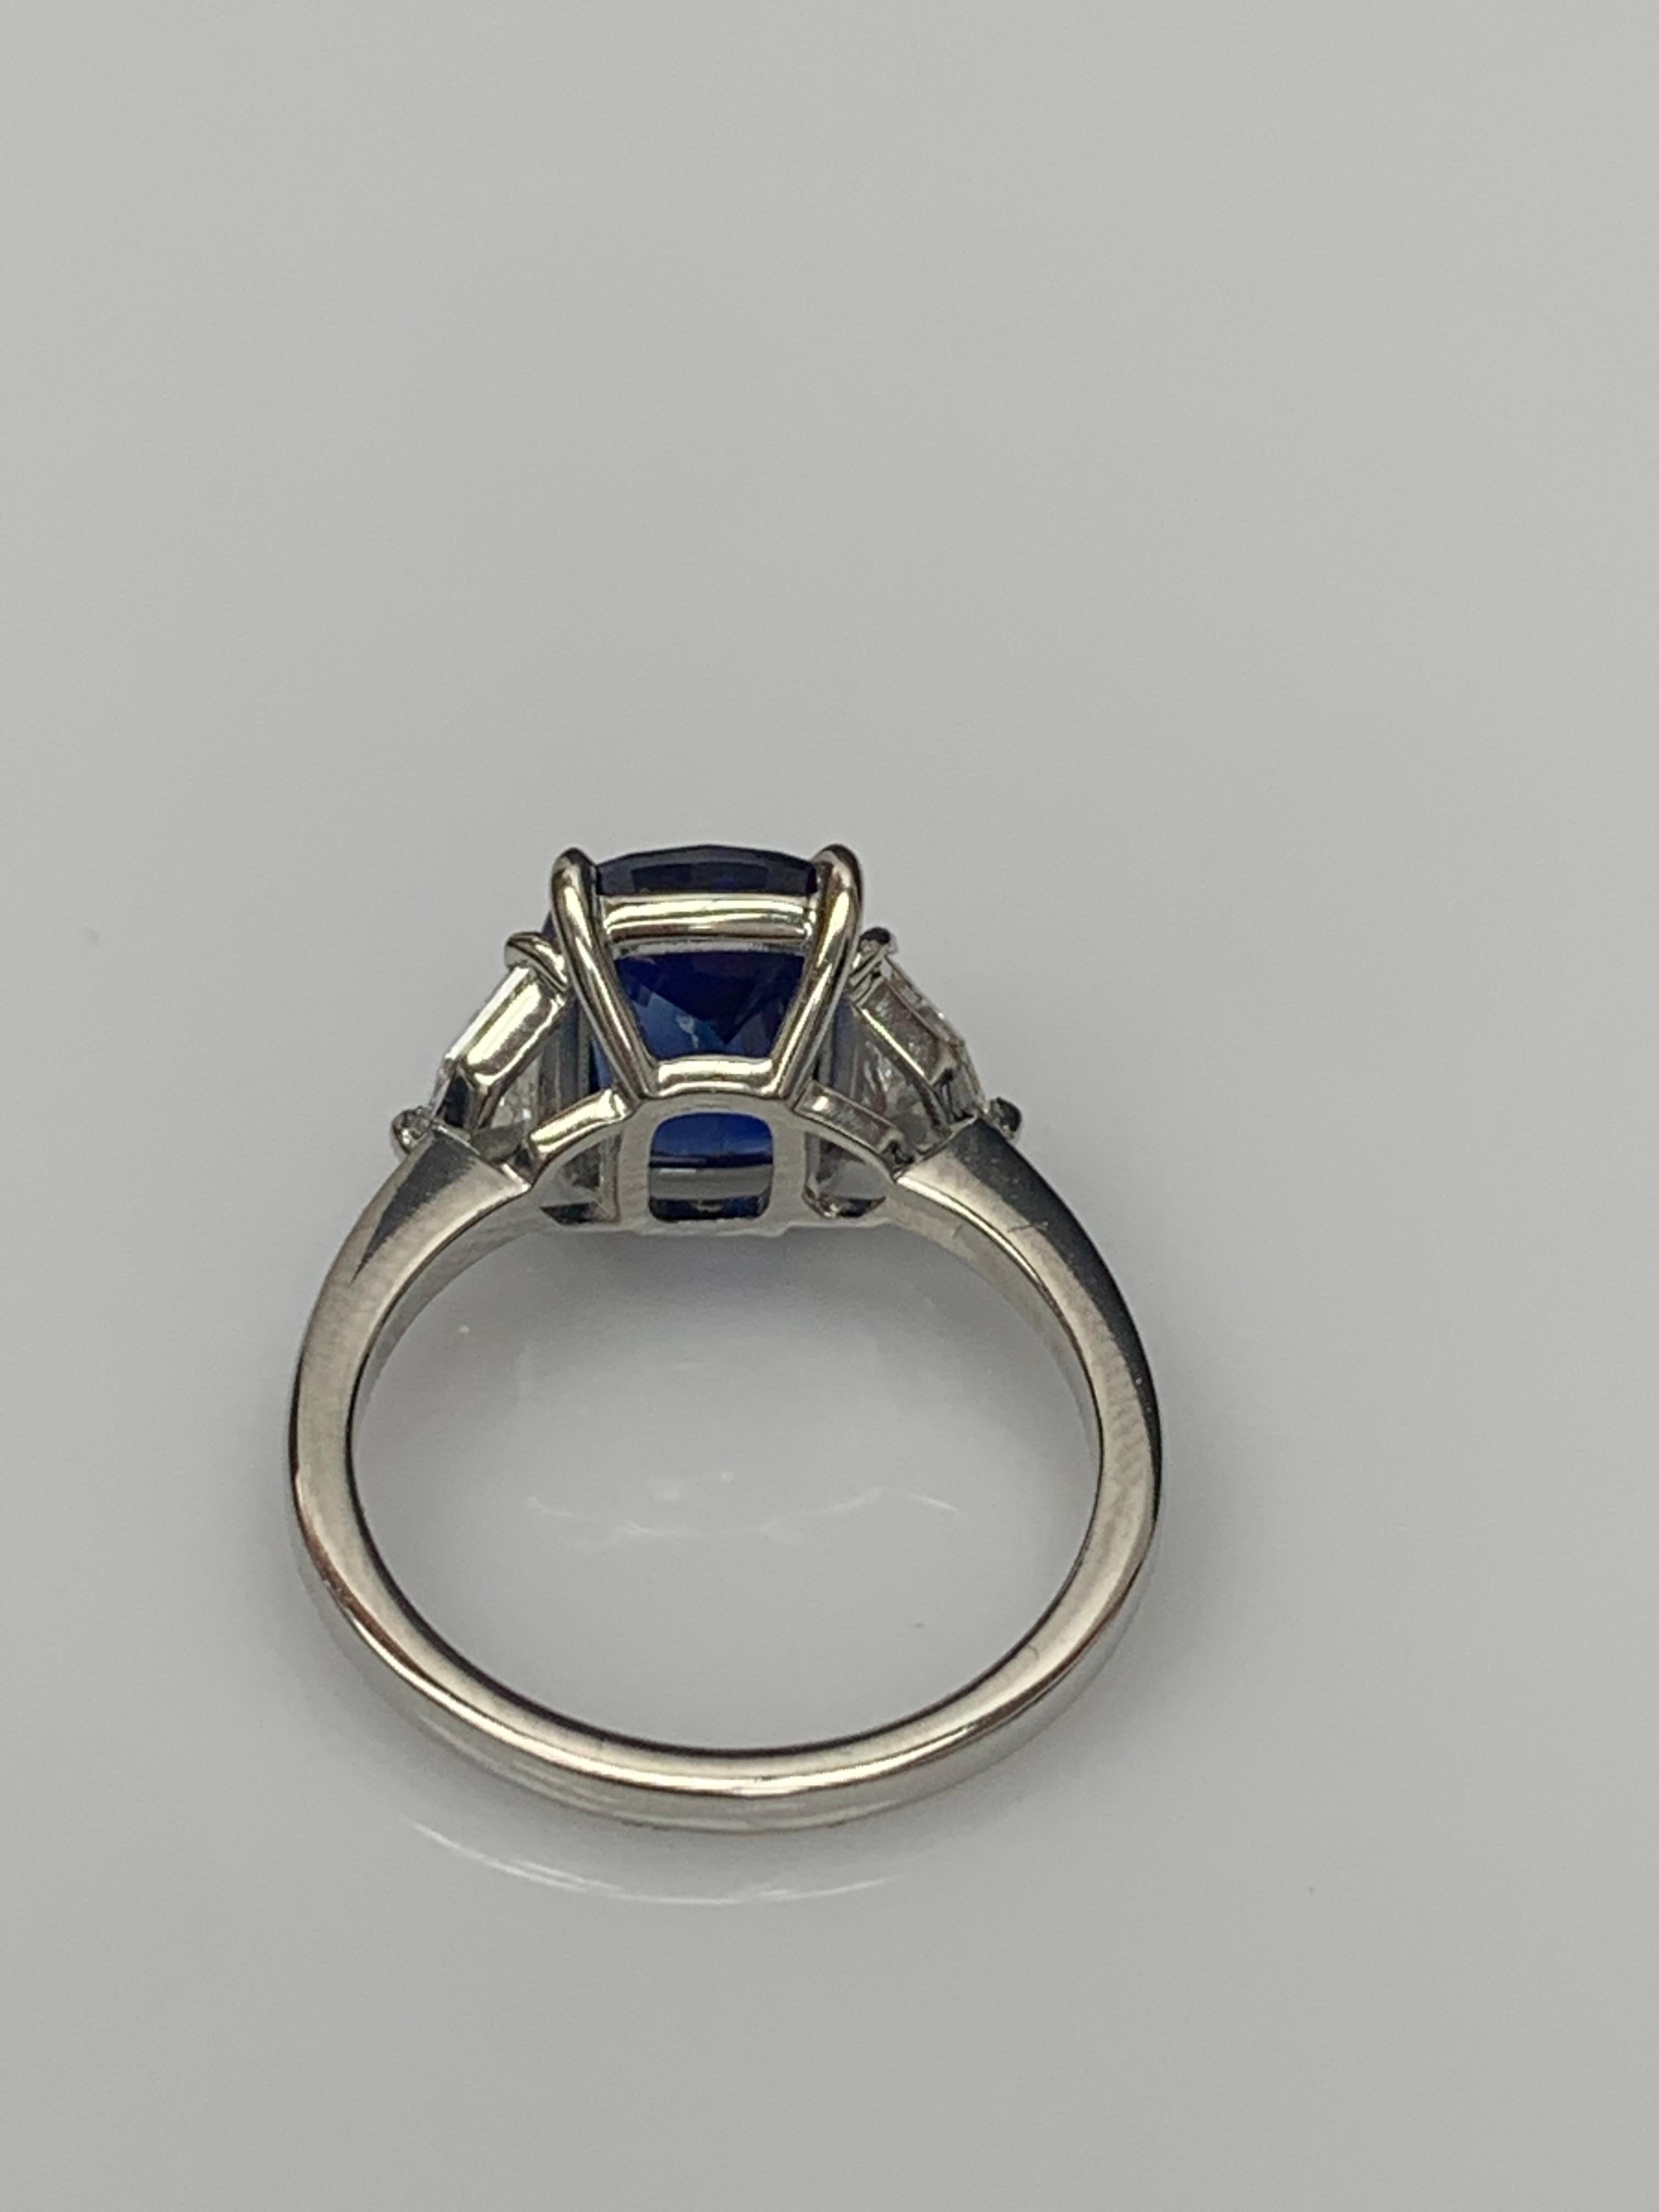 Certified 3.54 Carat Cushion Cut Blue Sapphire Diamond 3-Stone Ring in Platinum For Sale 4